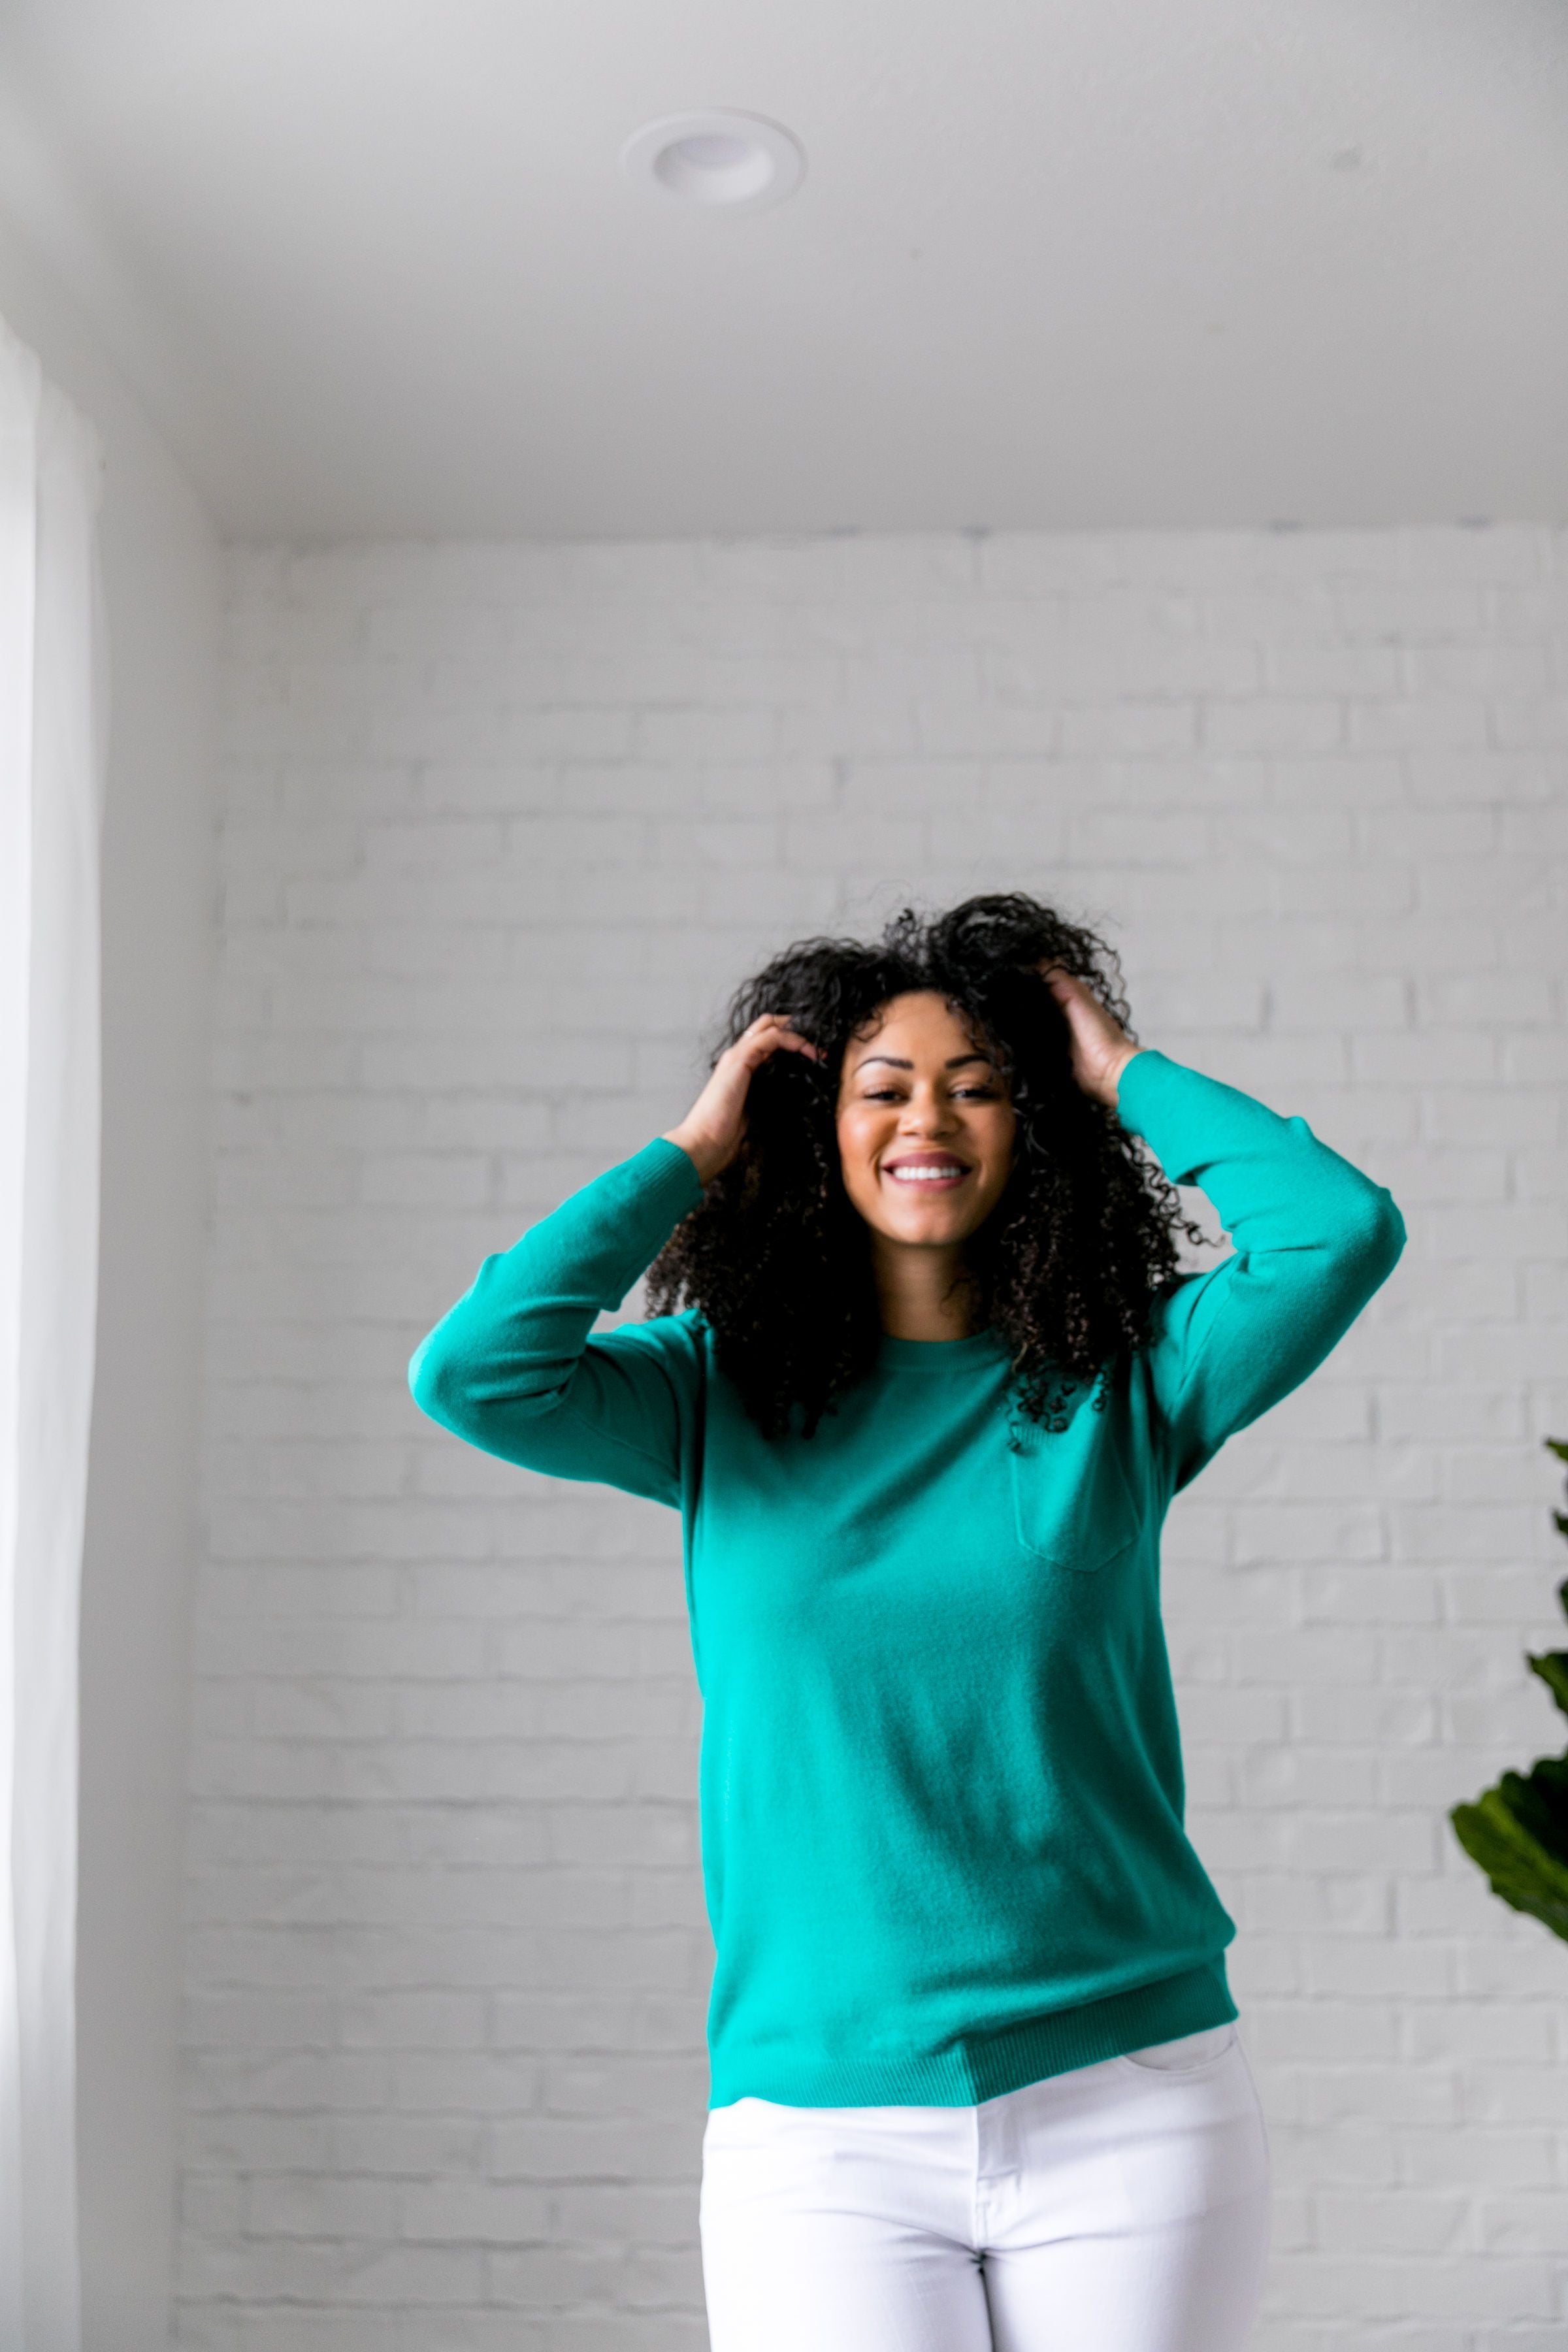 Top 'O The Mornin' Sweater In Emerald - ALL SALES FINAL